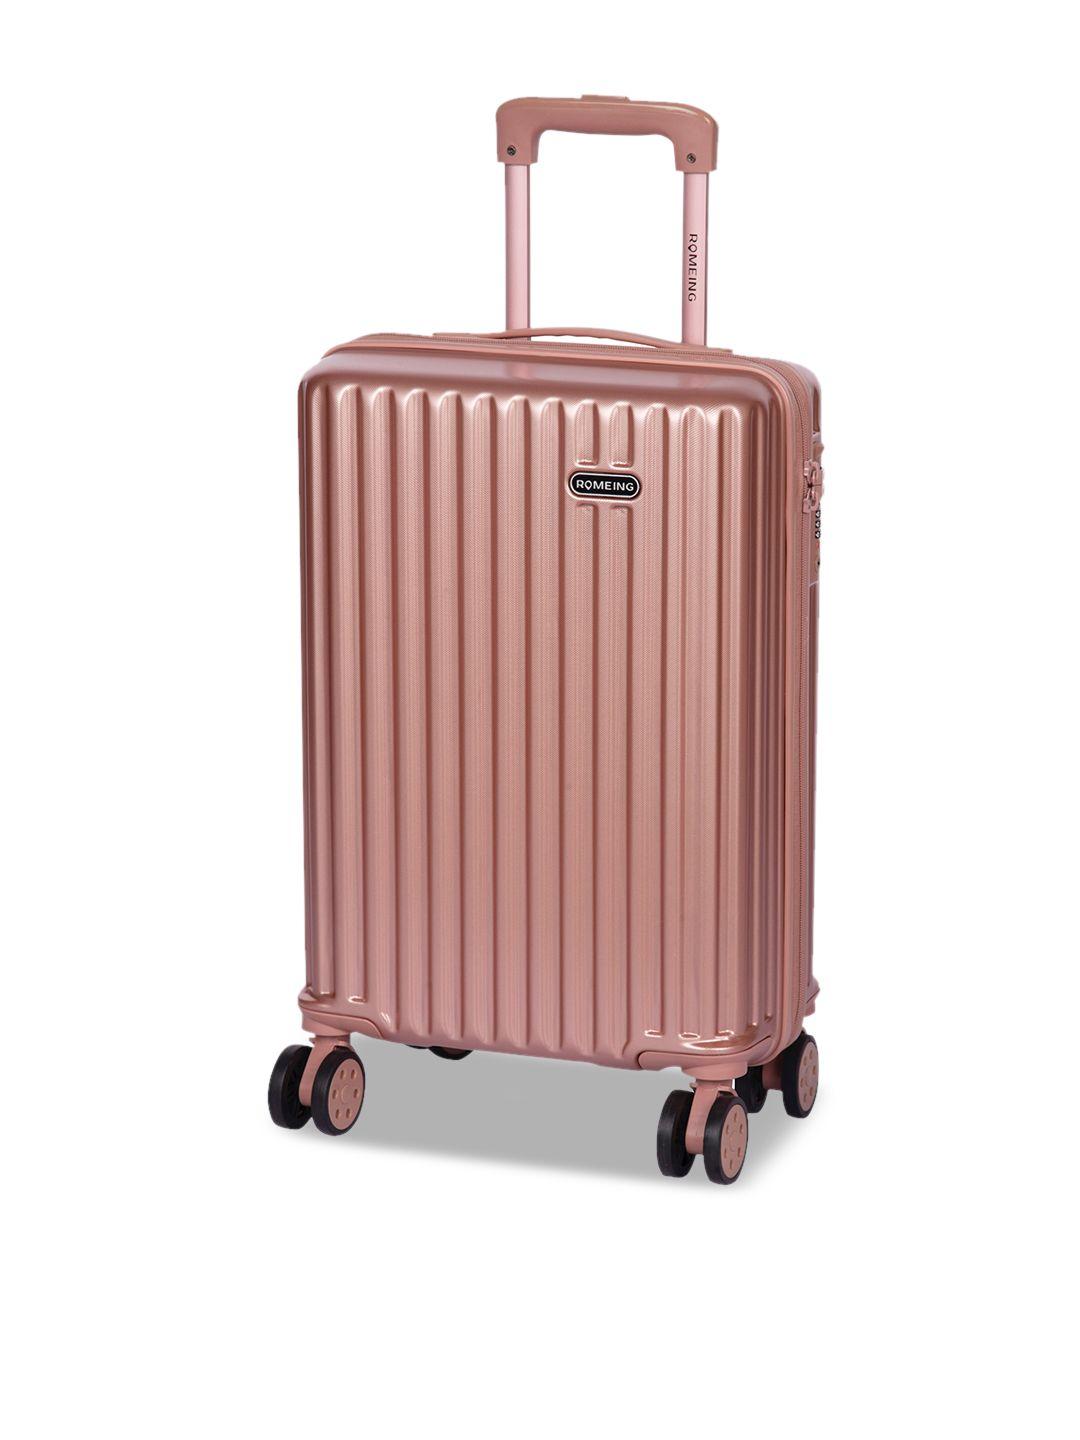 romeing genoa rose gold-toned polycarbonate hard sided cabin trolley suitcase